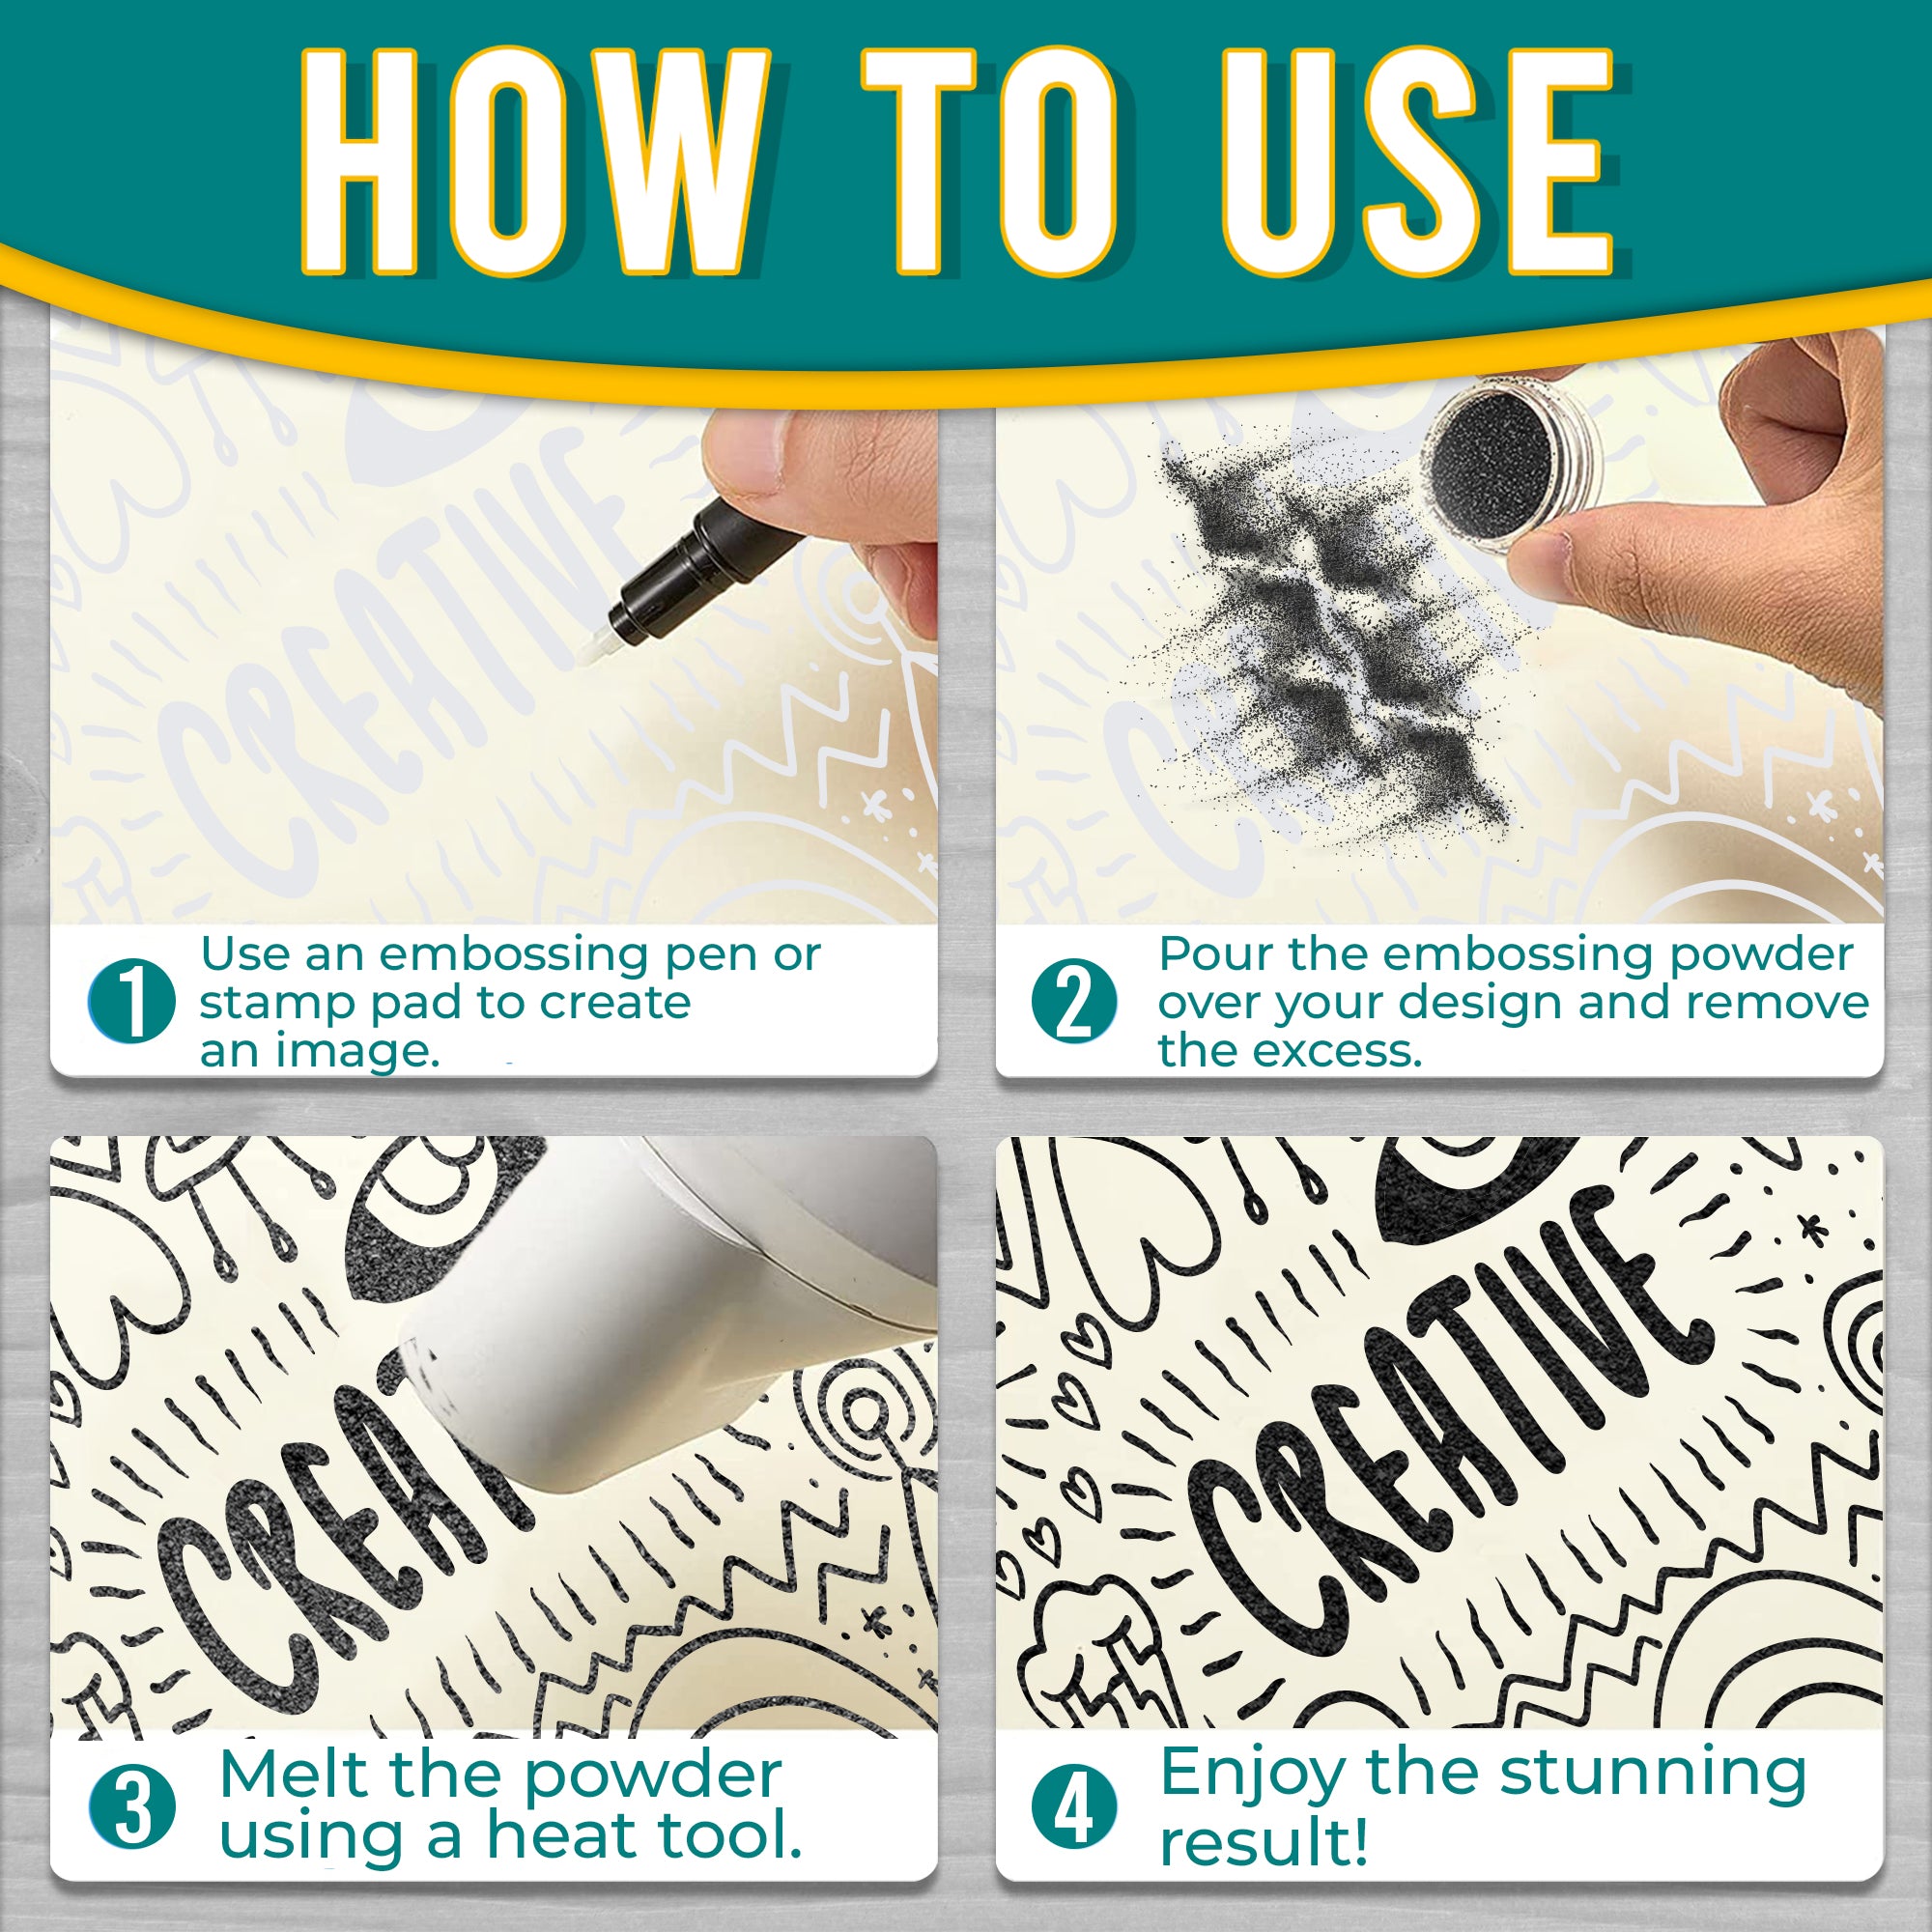 Instructions for using Black embossing powder, featuring application steps with visuals: create an image, pour powder, heat to melt, and the final result.